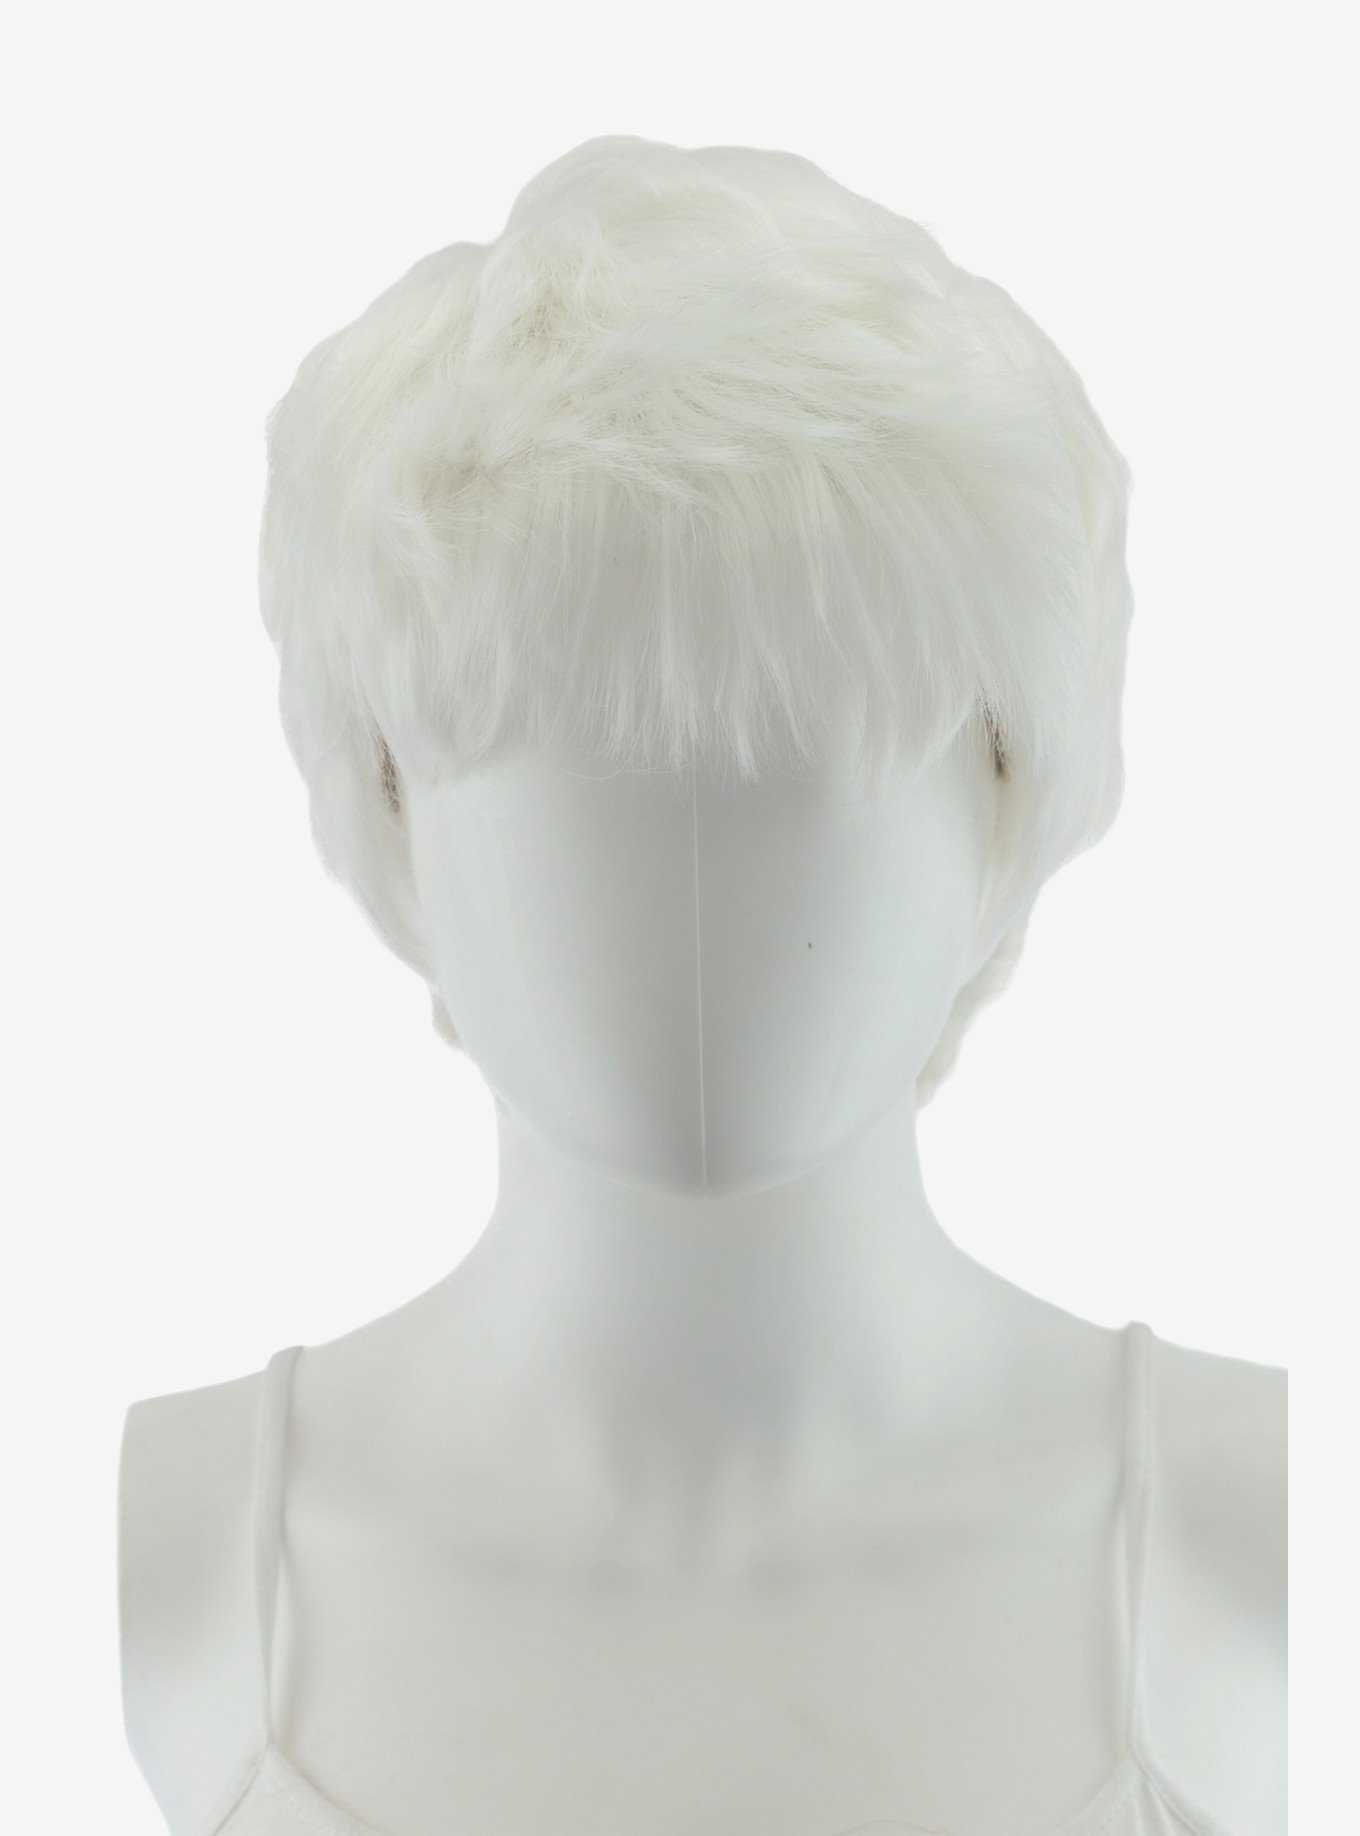 Epic Cosplay Hermes Classic White Pixie Hair Wig, , hi-res